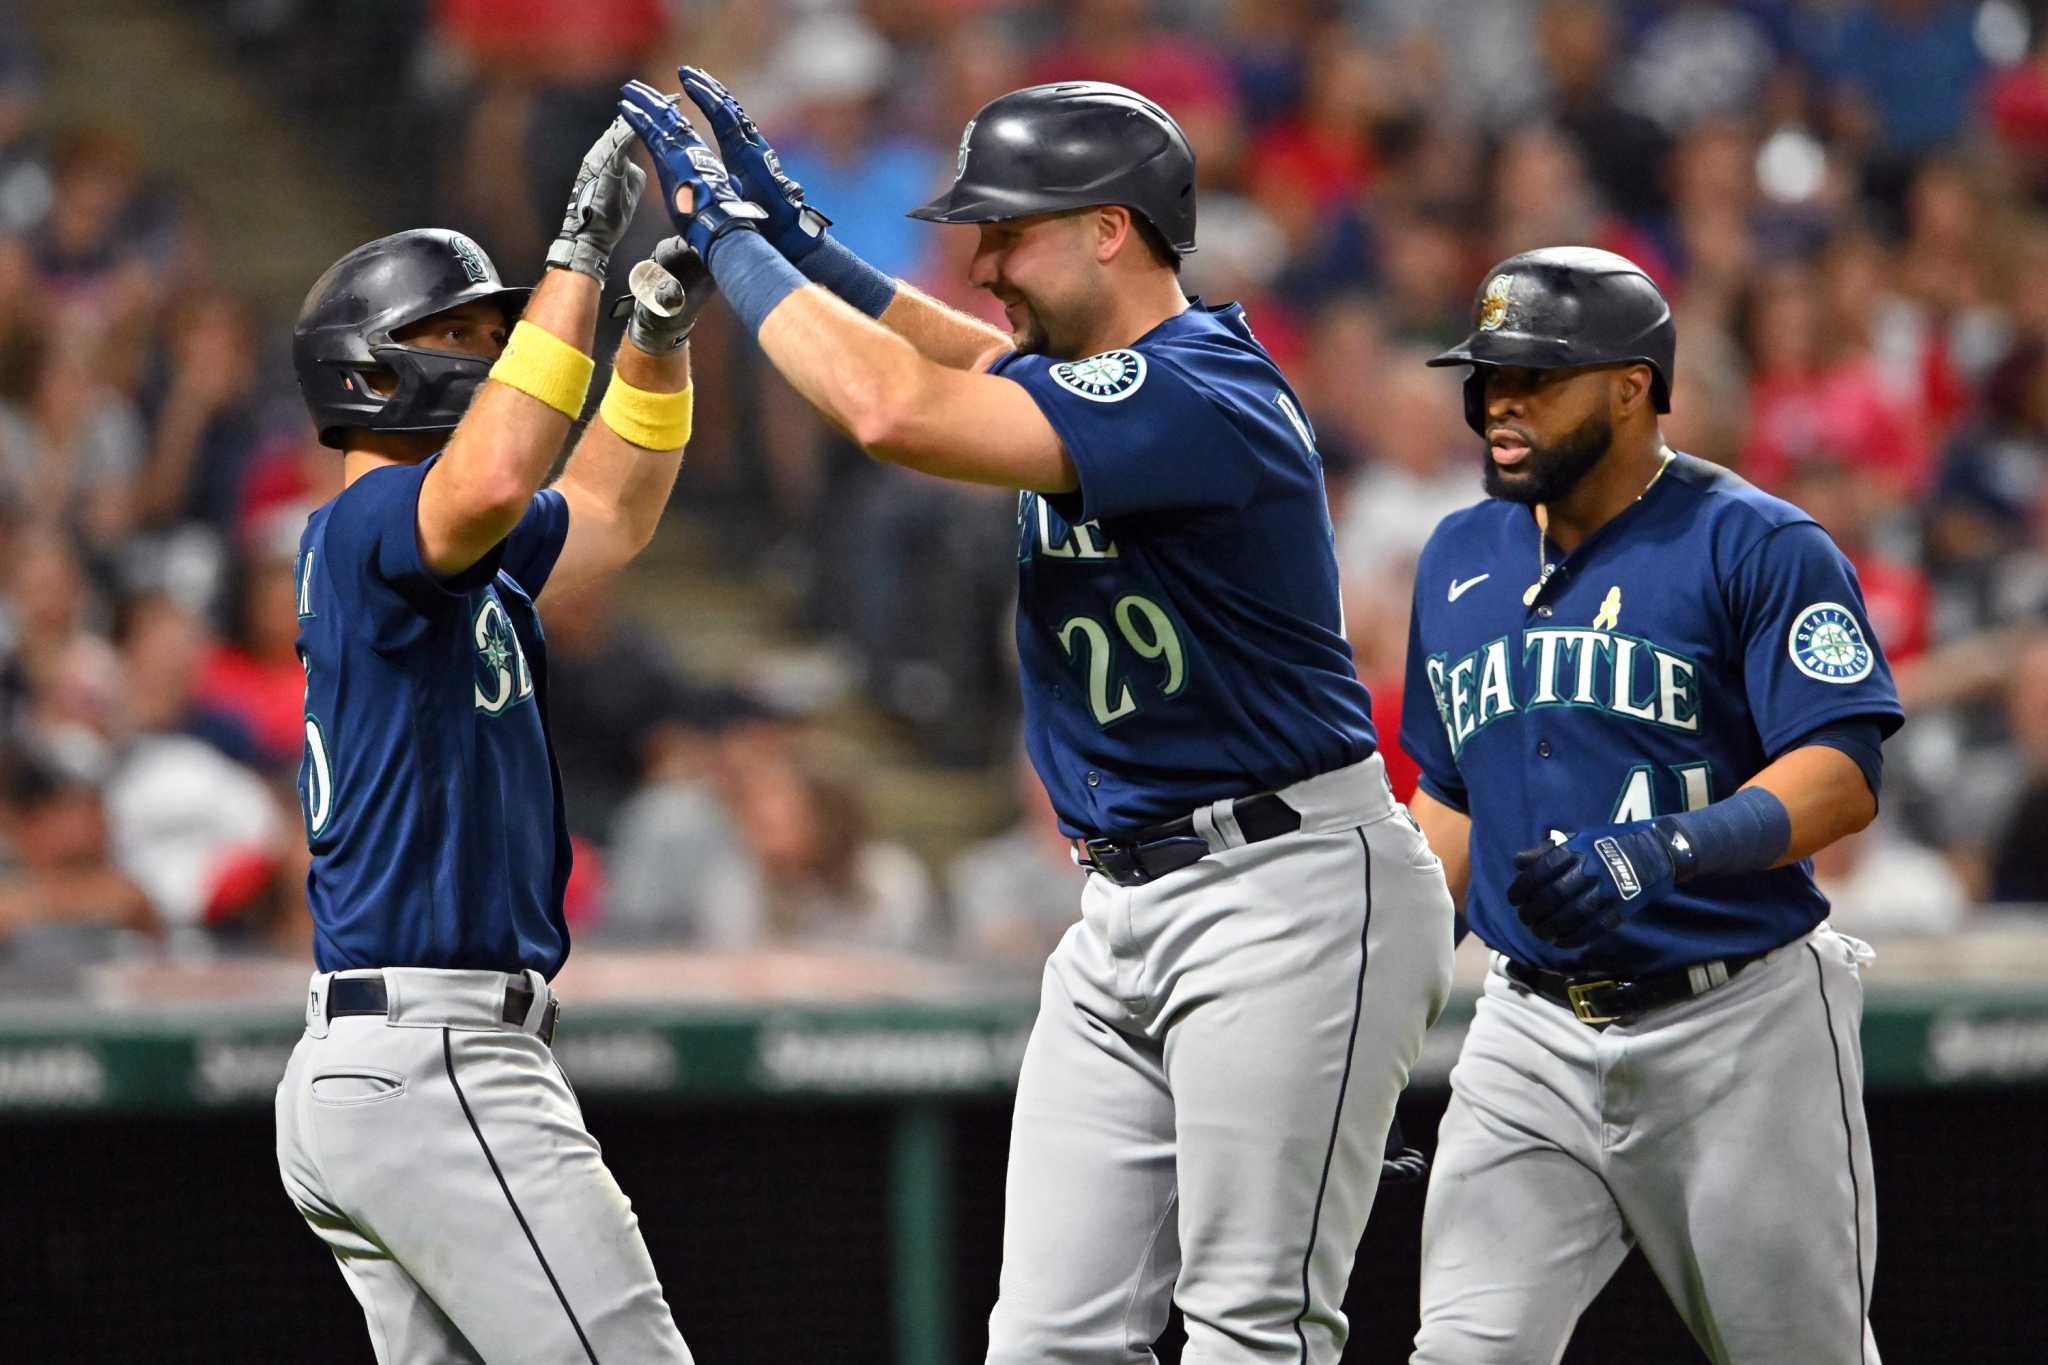 MLB roundup: Luis Castillo pitches Mariners past Yankees